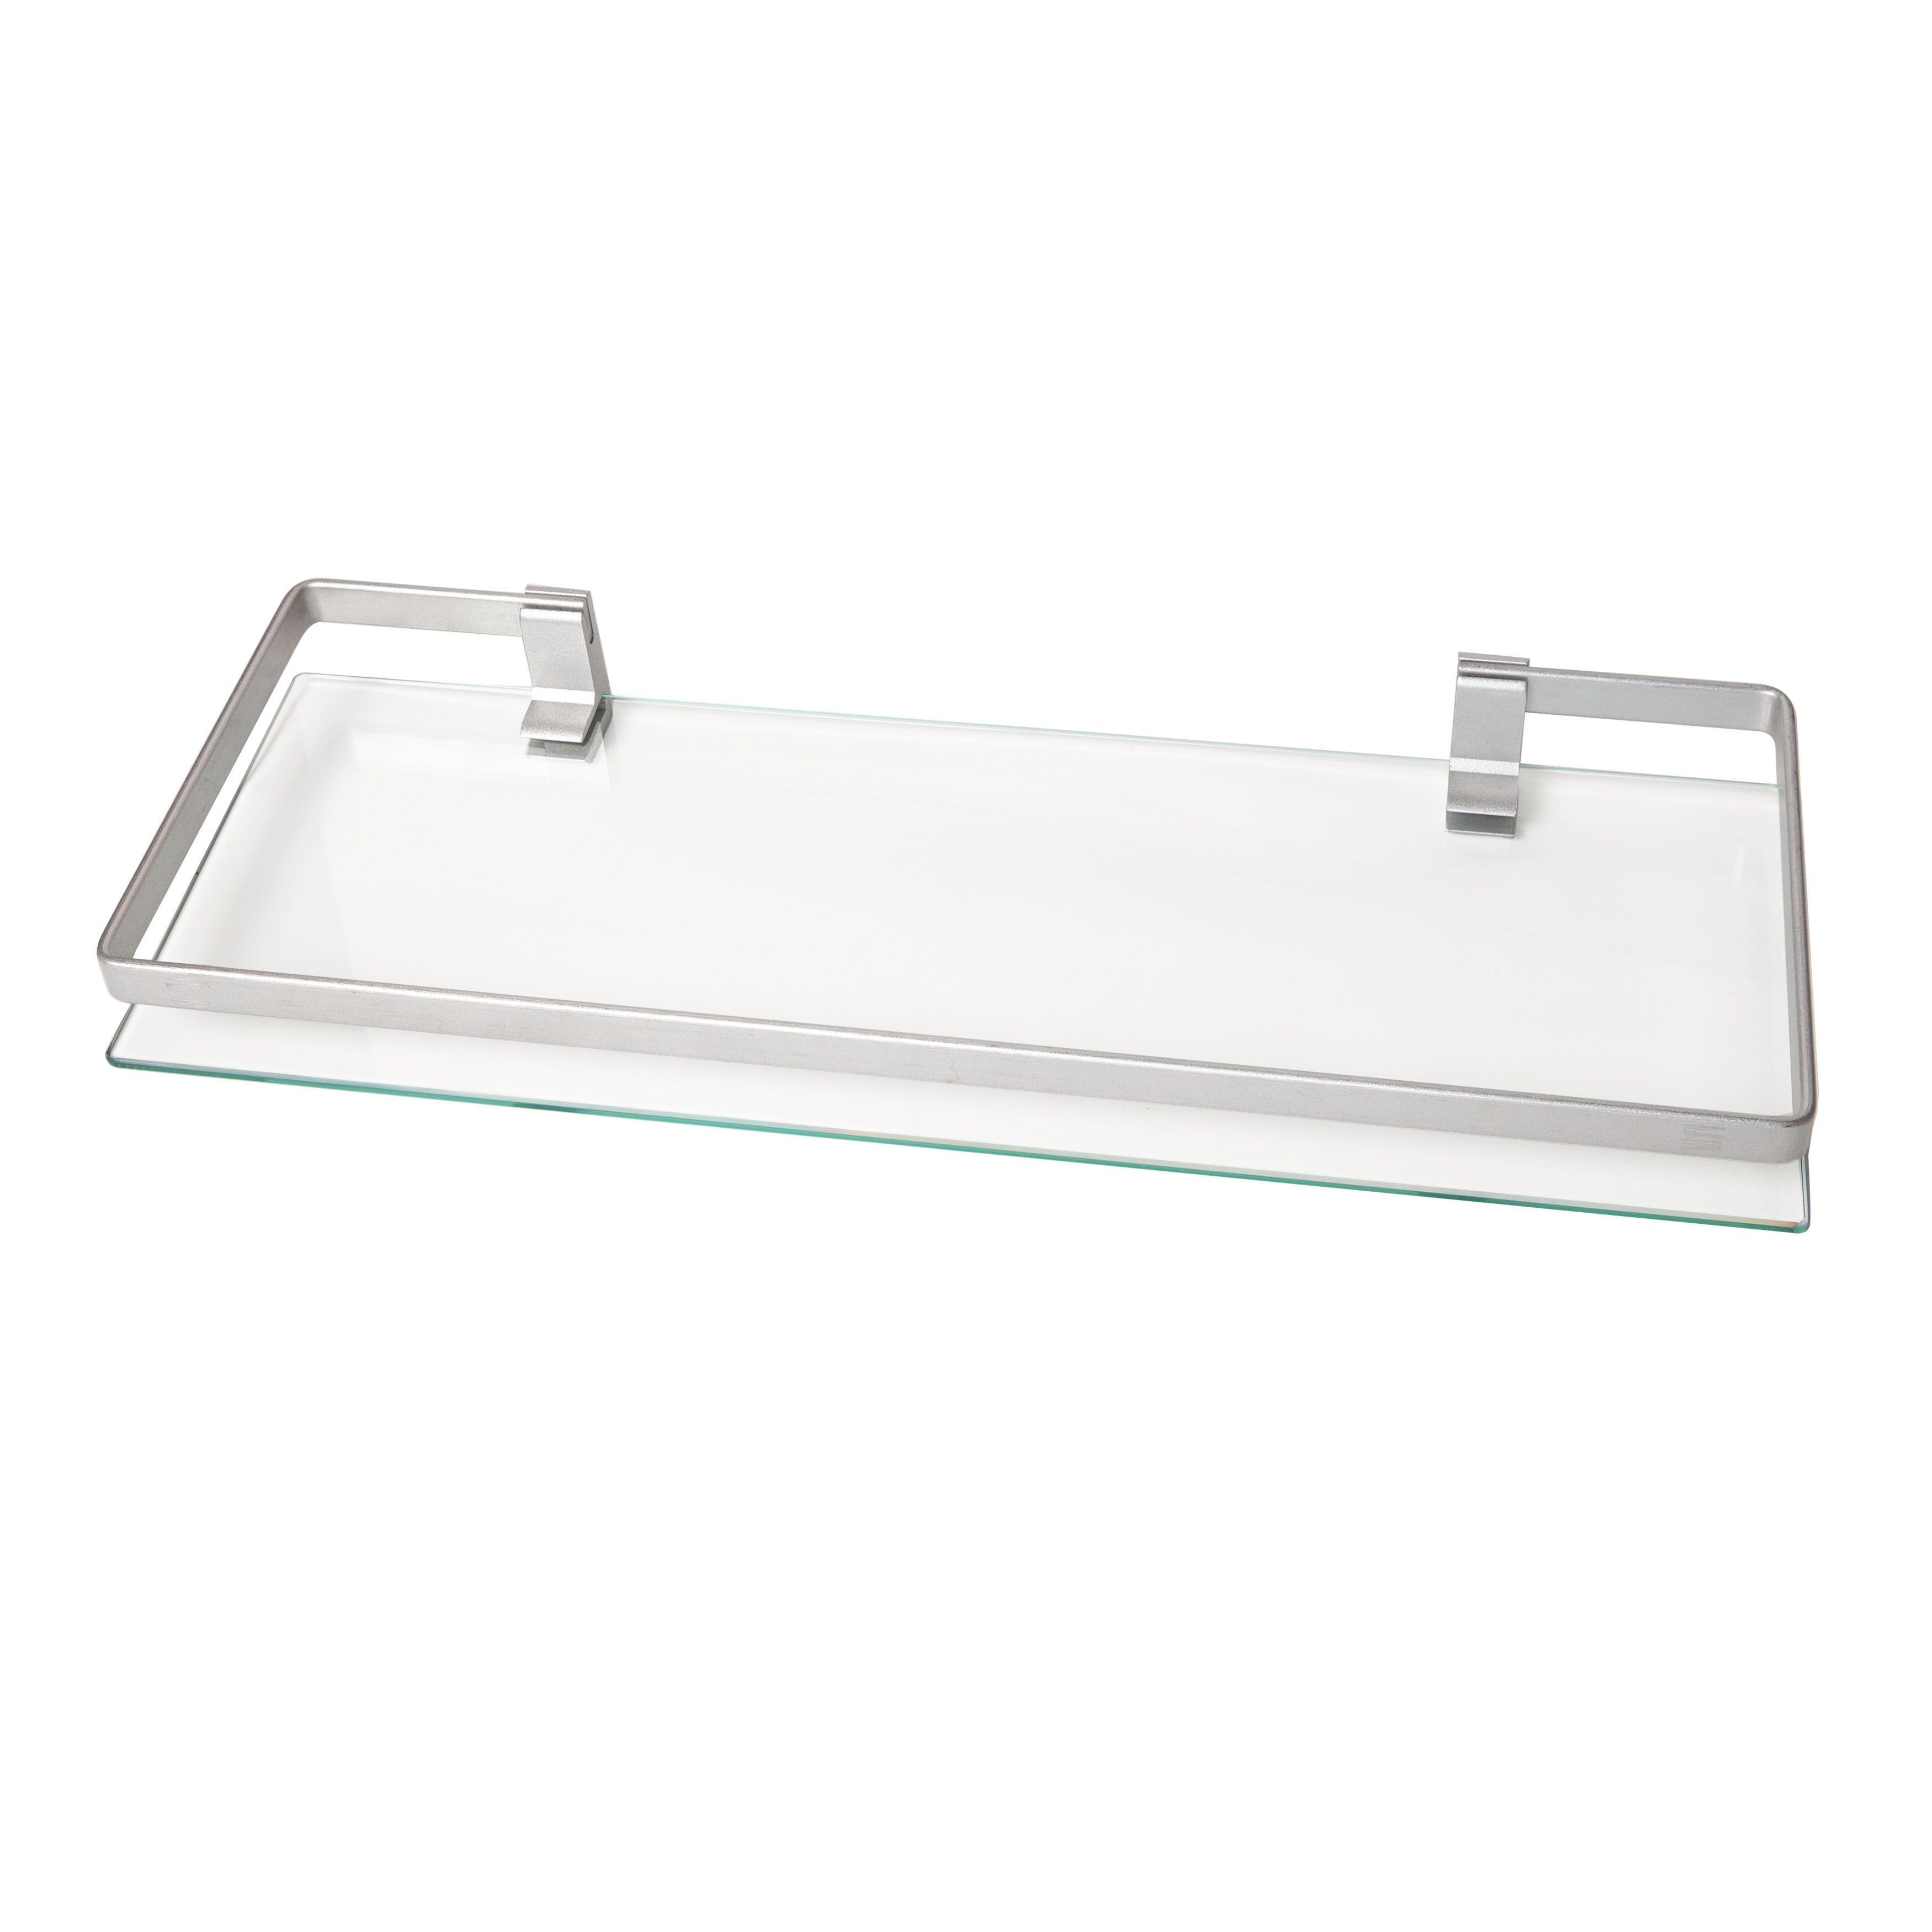 Duemila 5526.29_5576-79.81G by WS Bath Collections, Wall Mounted Frosted  Glass Adhesive Bathroom Shelf, Polished Chrome